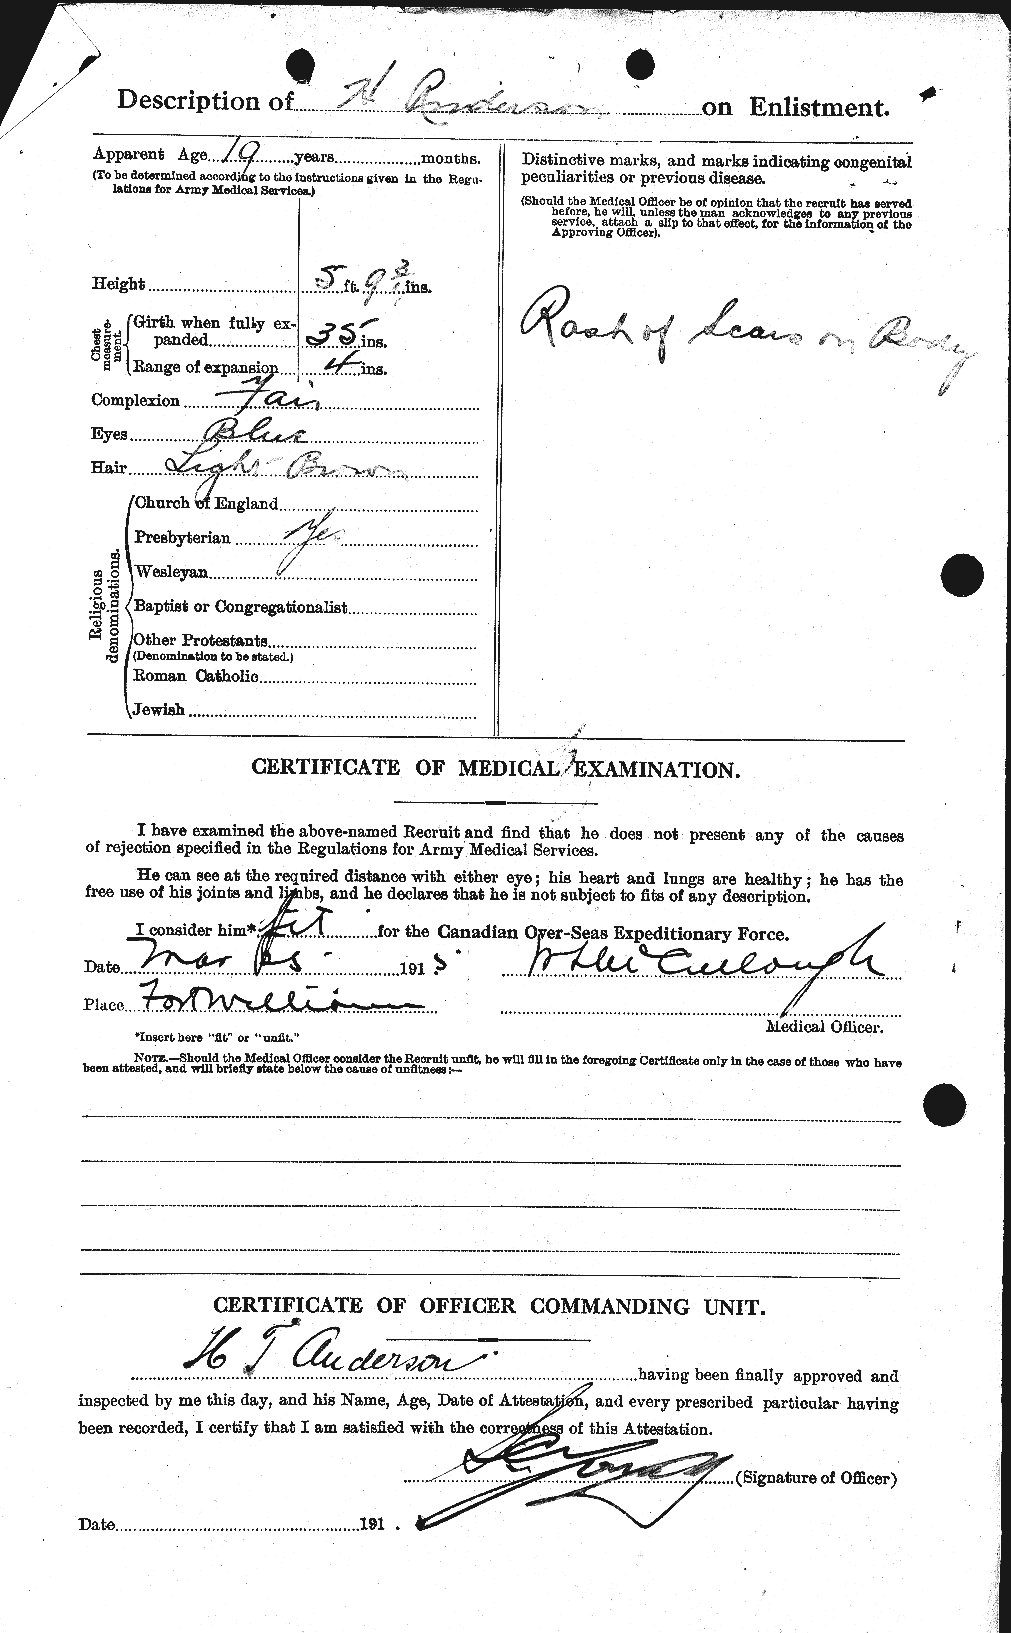 Personnel Records of the First World War - CEF 209639b